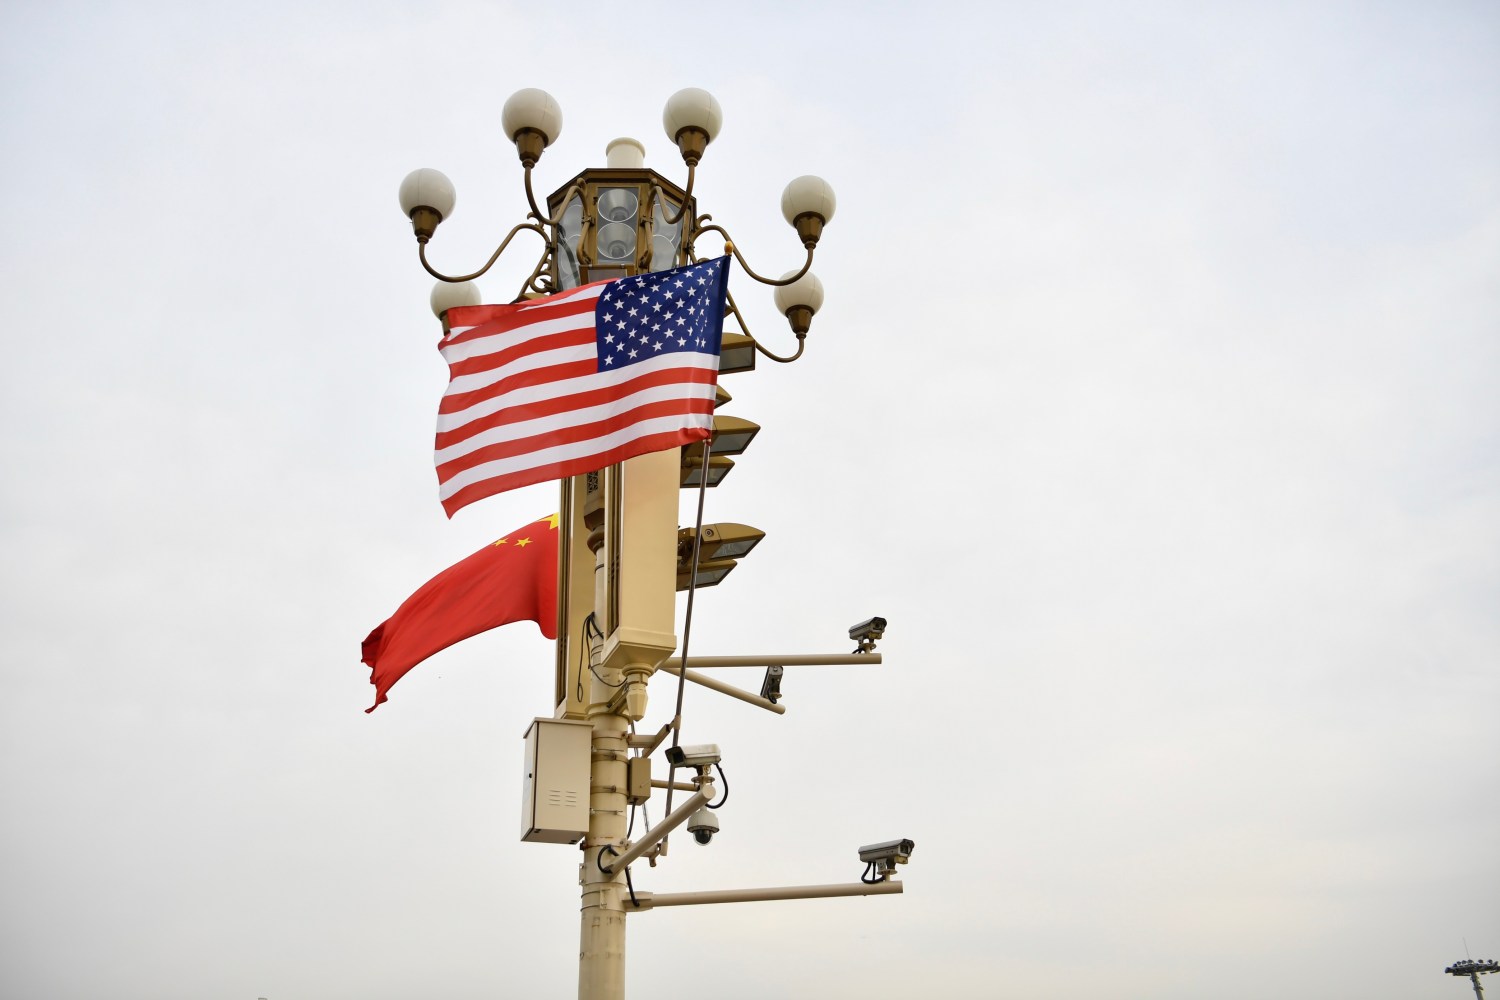 Chinese and American national flags flutter on a lamppost in Beijing festooned with surveillance cameras.